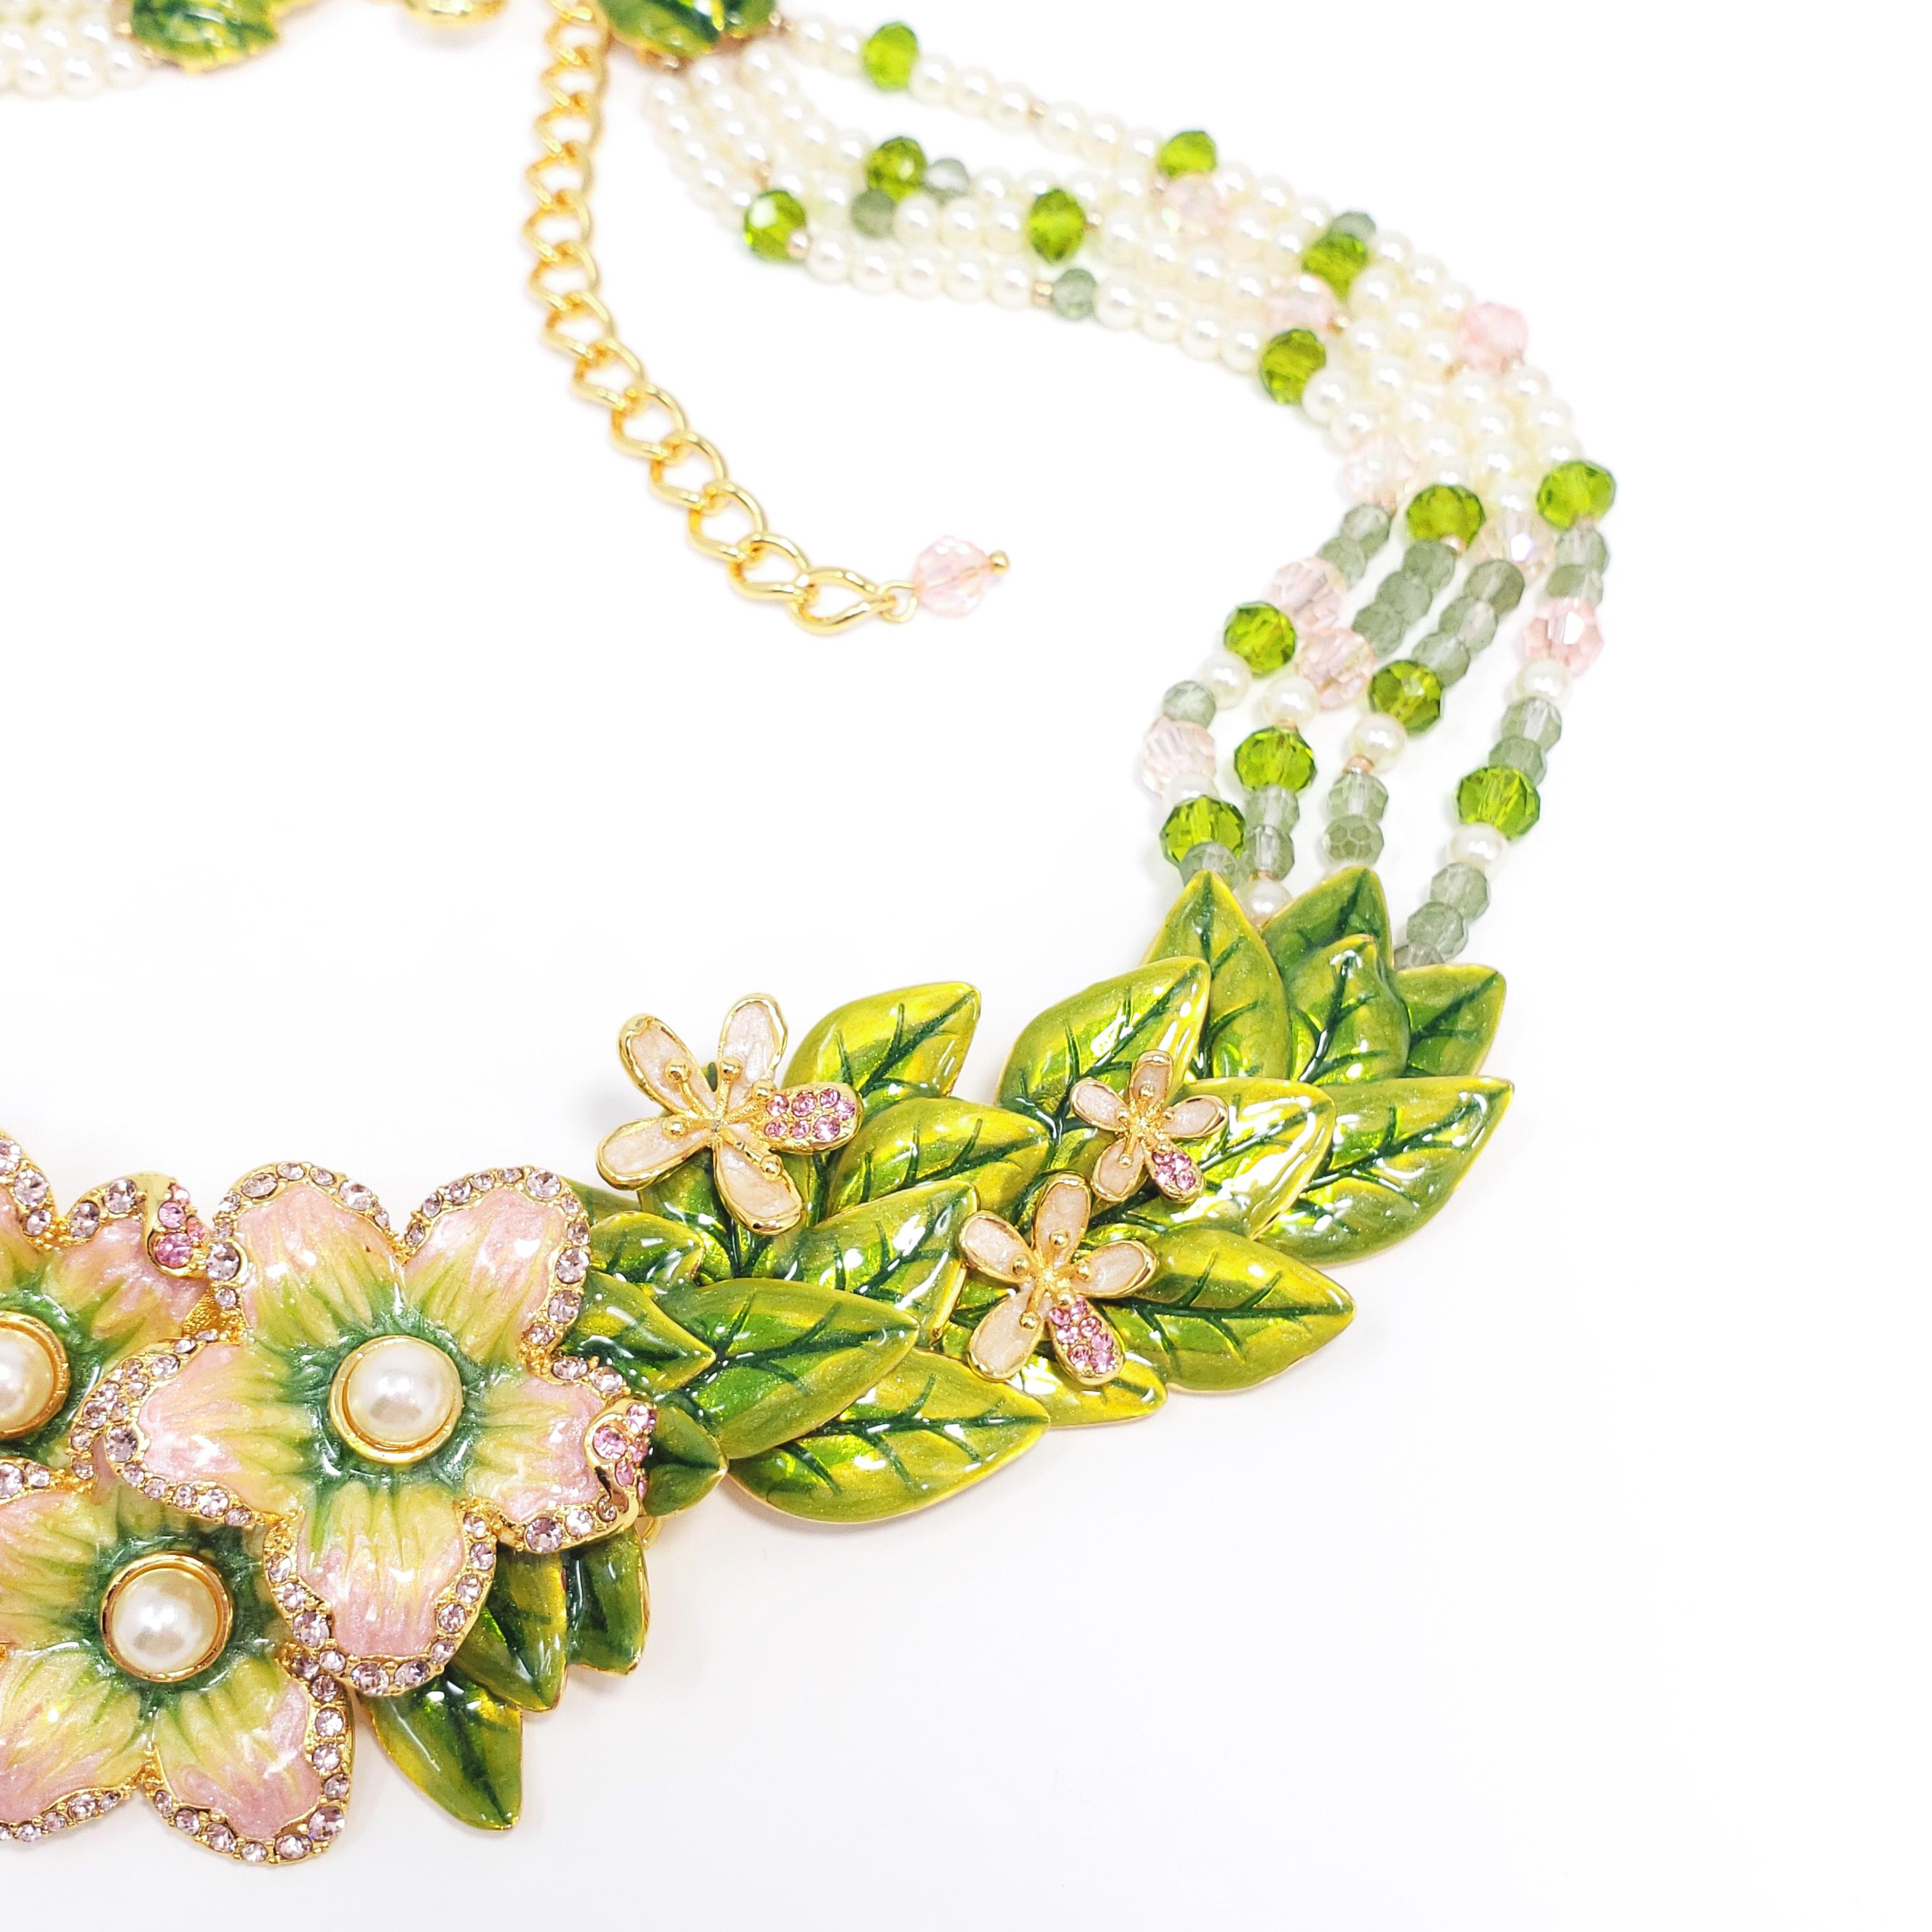 Women's Jay Strongwater “Spring Blossom”  Enamel, Crystal and Simulated Pearl Necklace